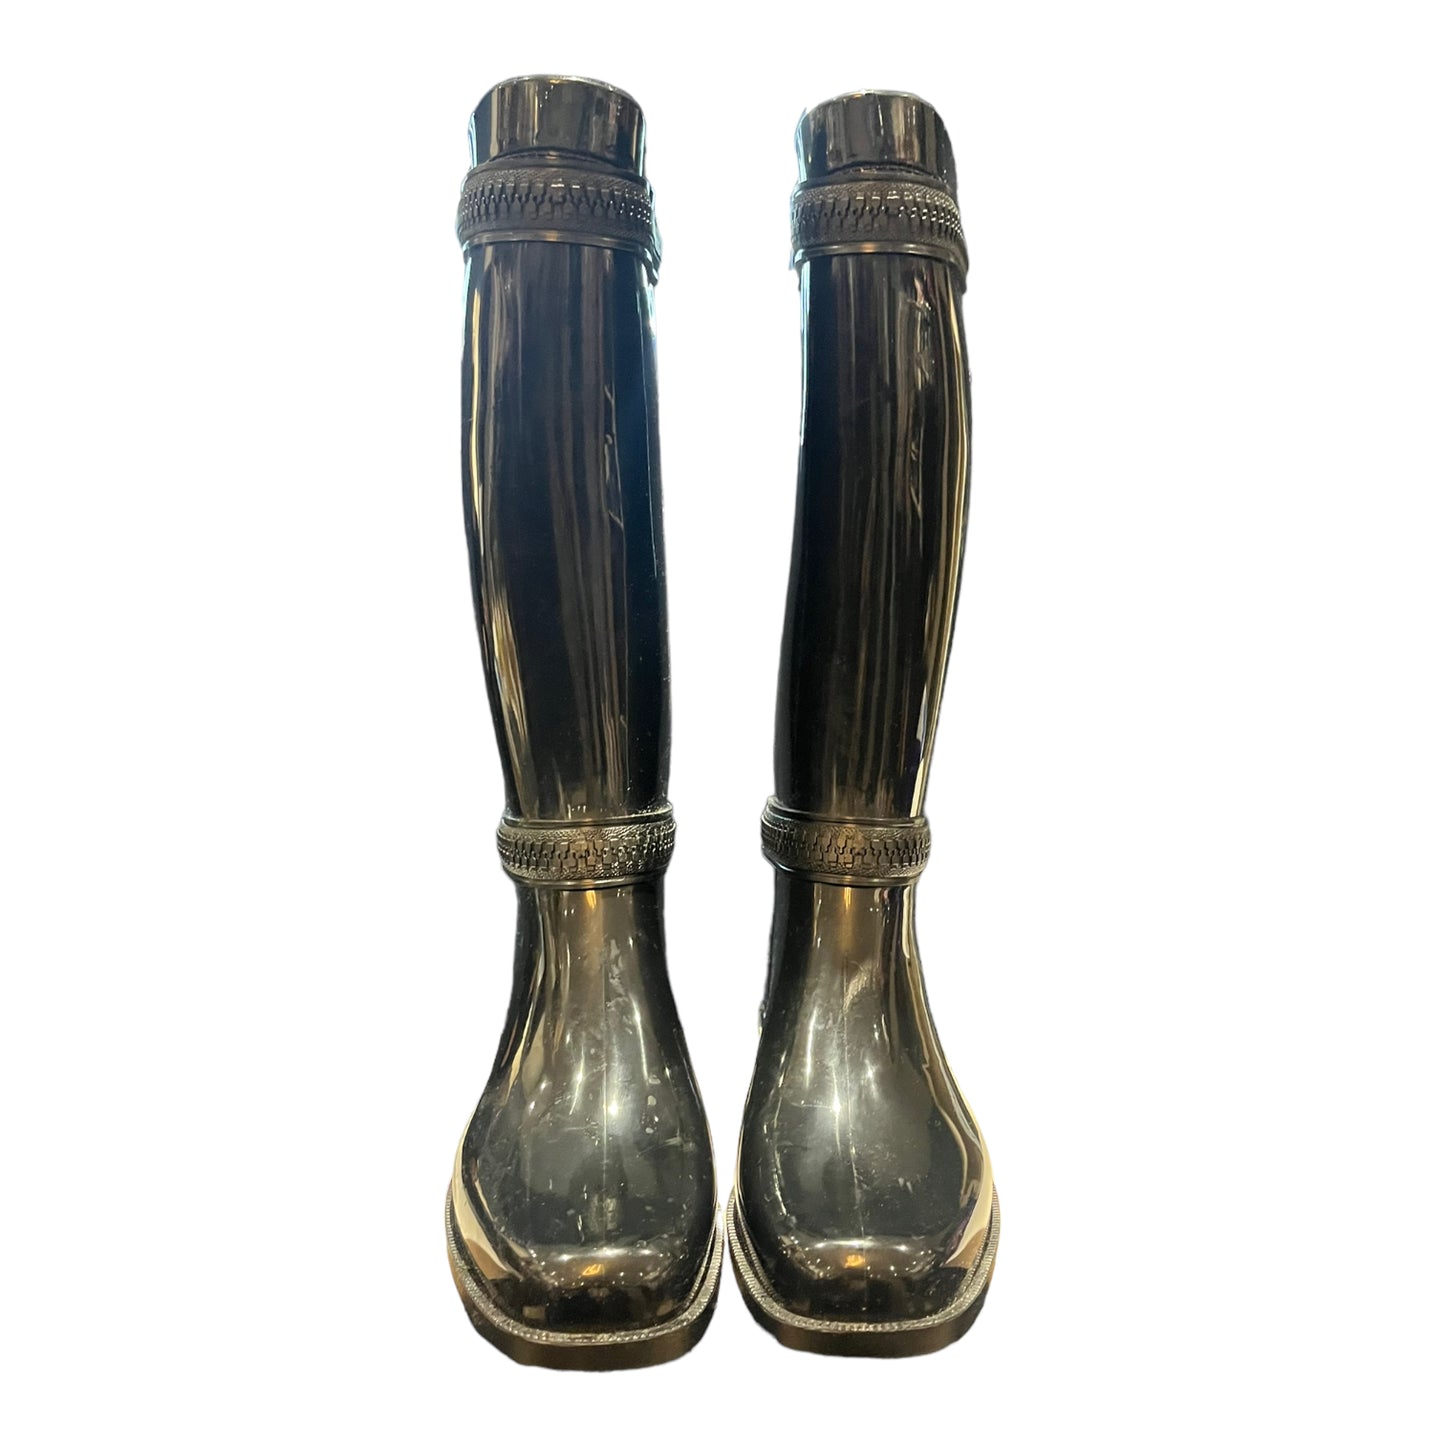 Givenchy Black Wellie Boots